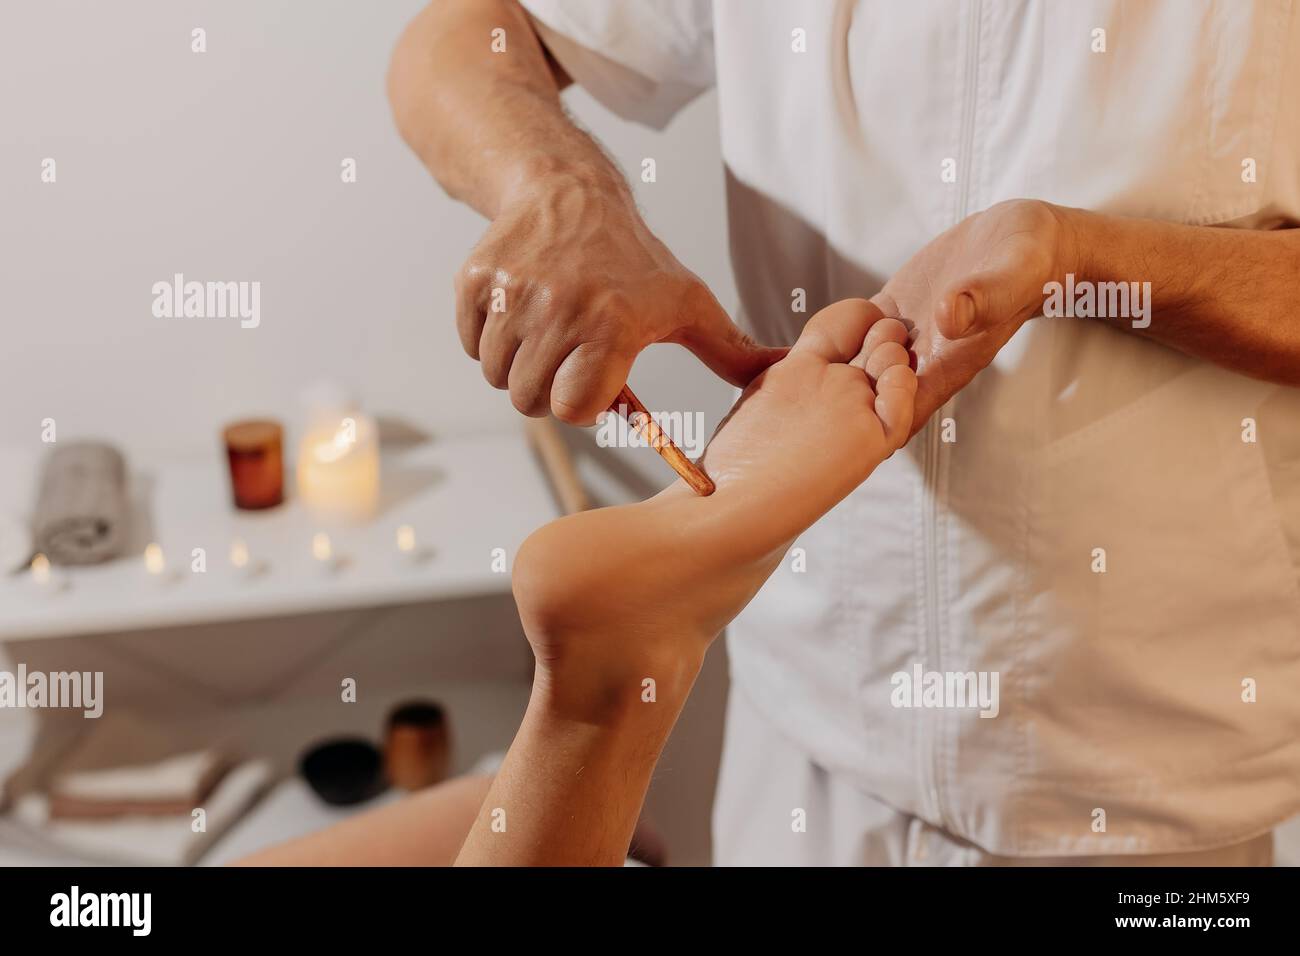 Reflexology foot massage with wooden thai stick. Acupressure in alternative medicine. Oriental physiotherapy through energy points on body. Bodycare and SPA in Thailand. Stock Photo